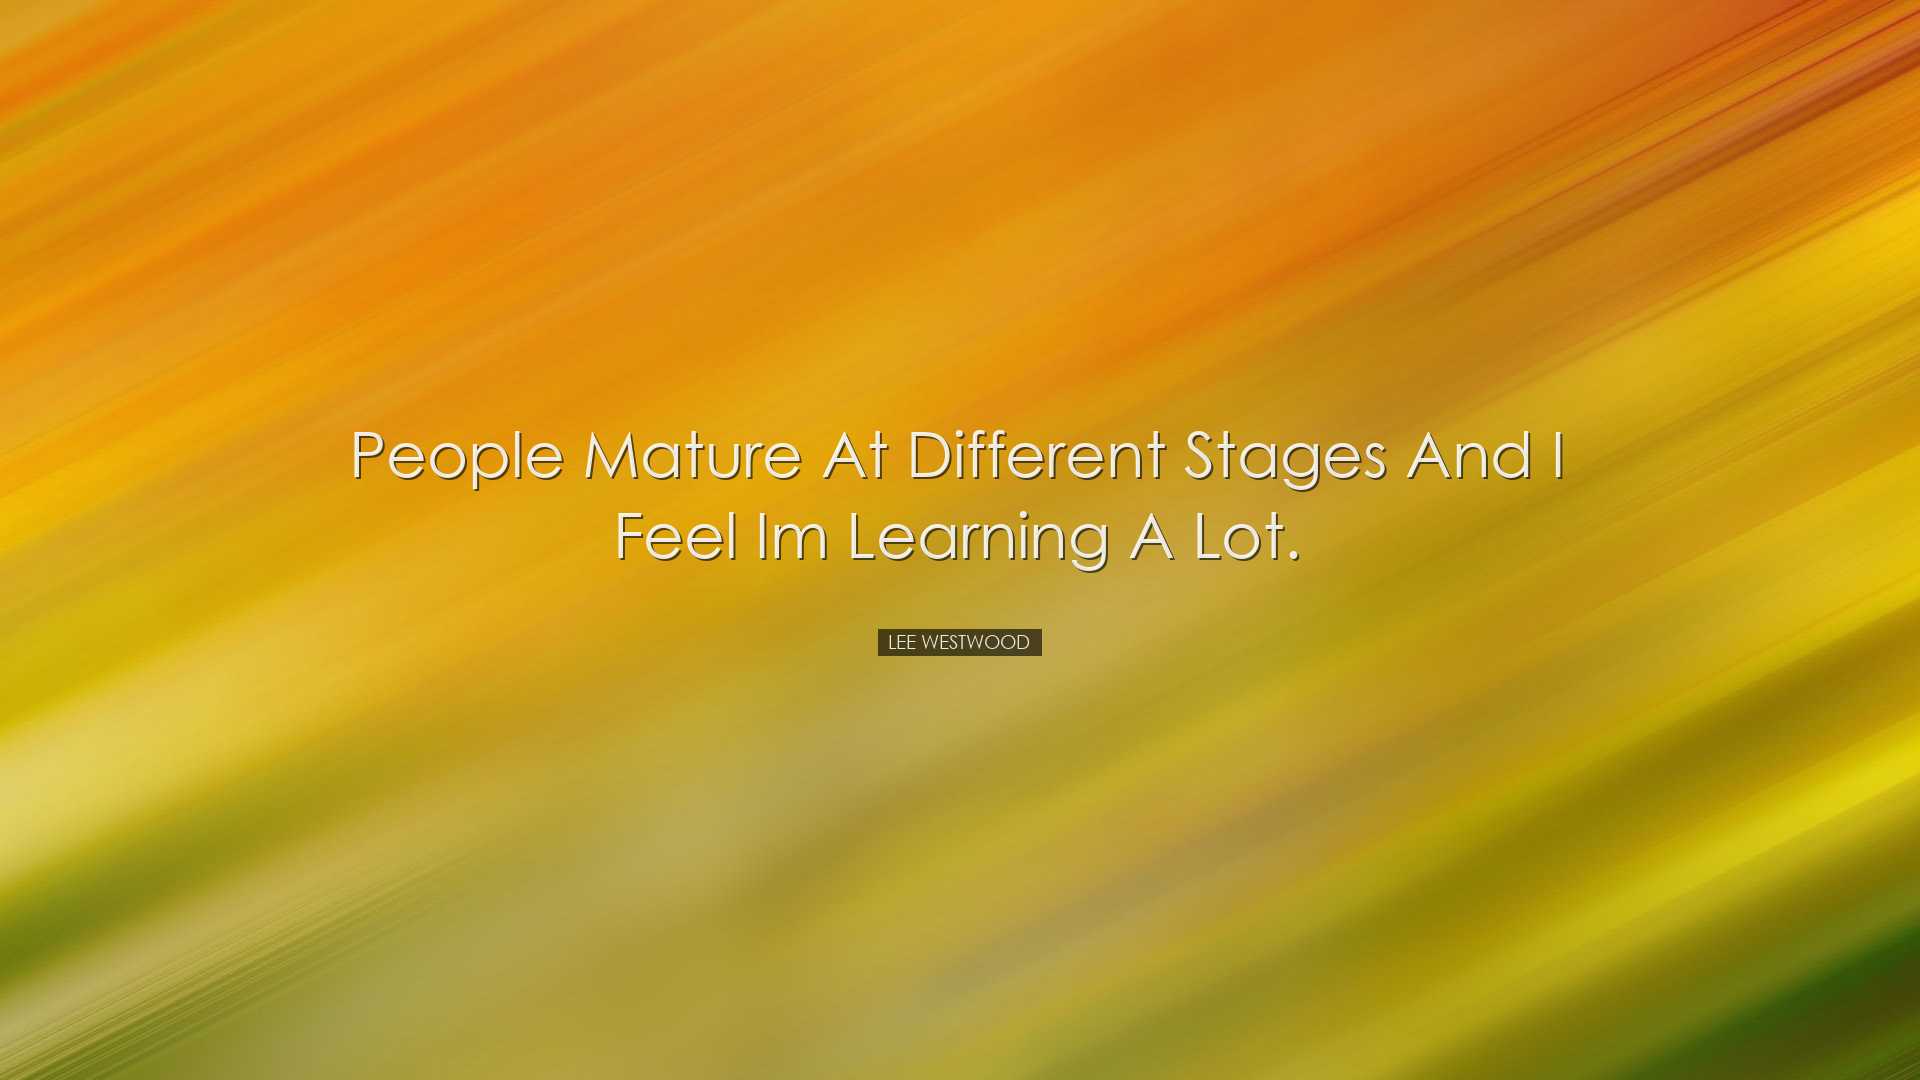 People mature at different stages and I feel Im learning a lot. -